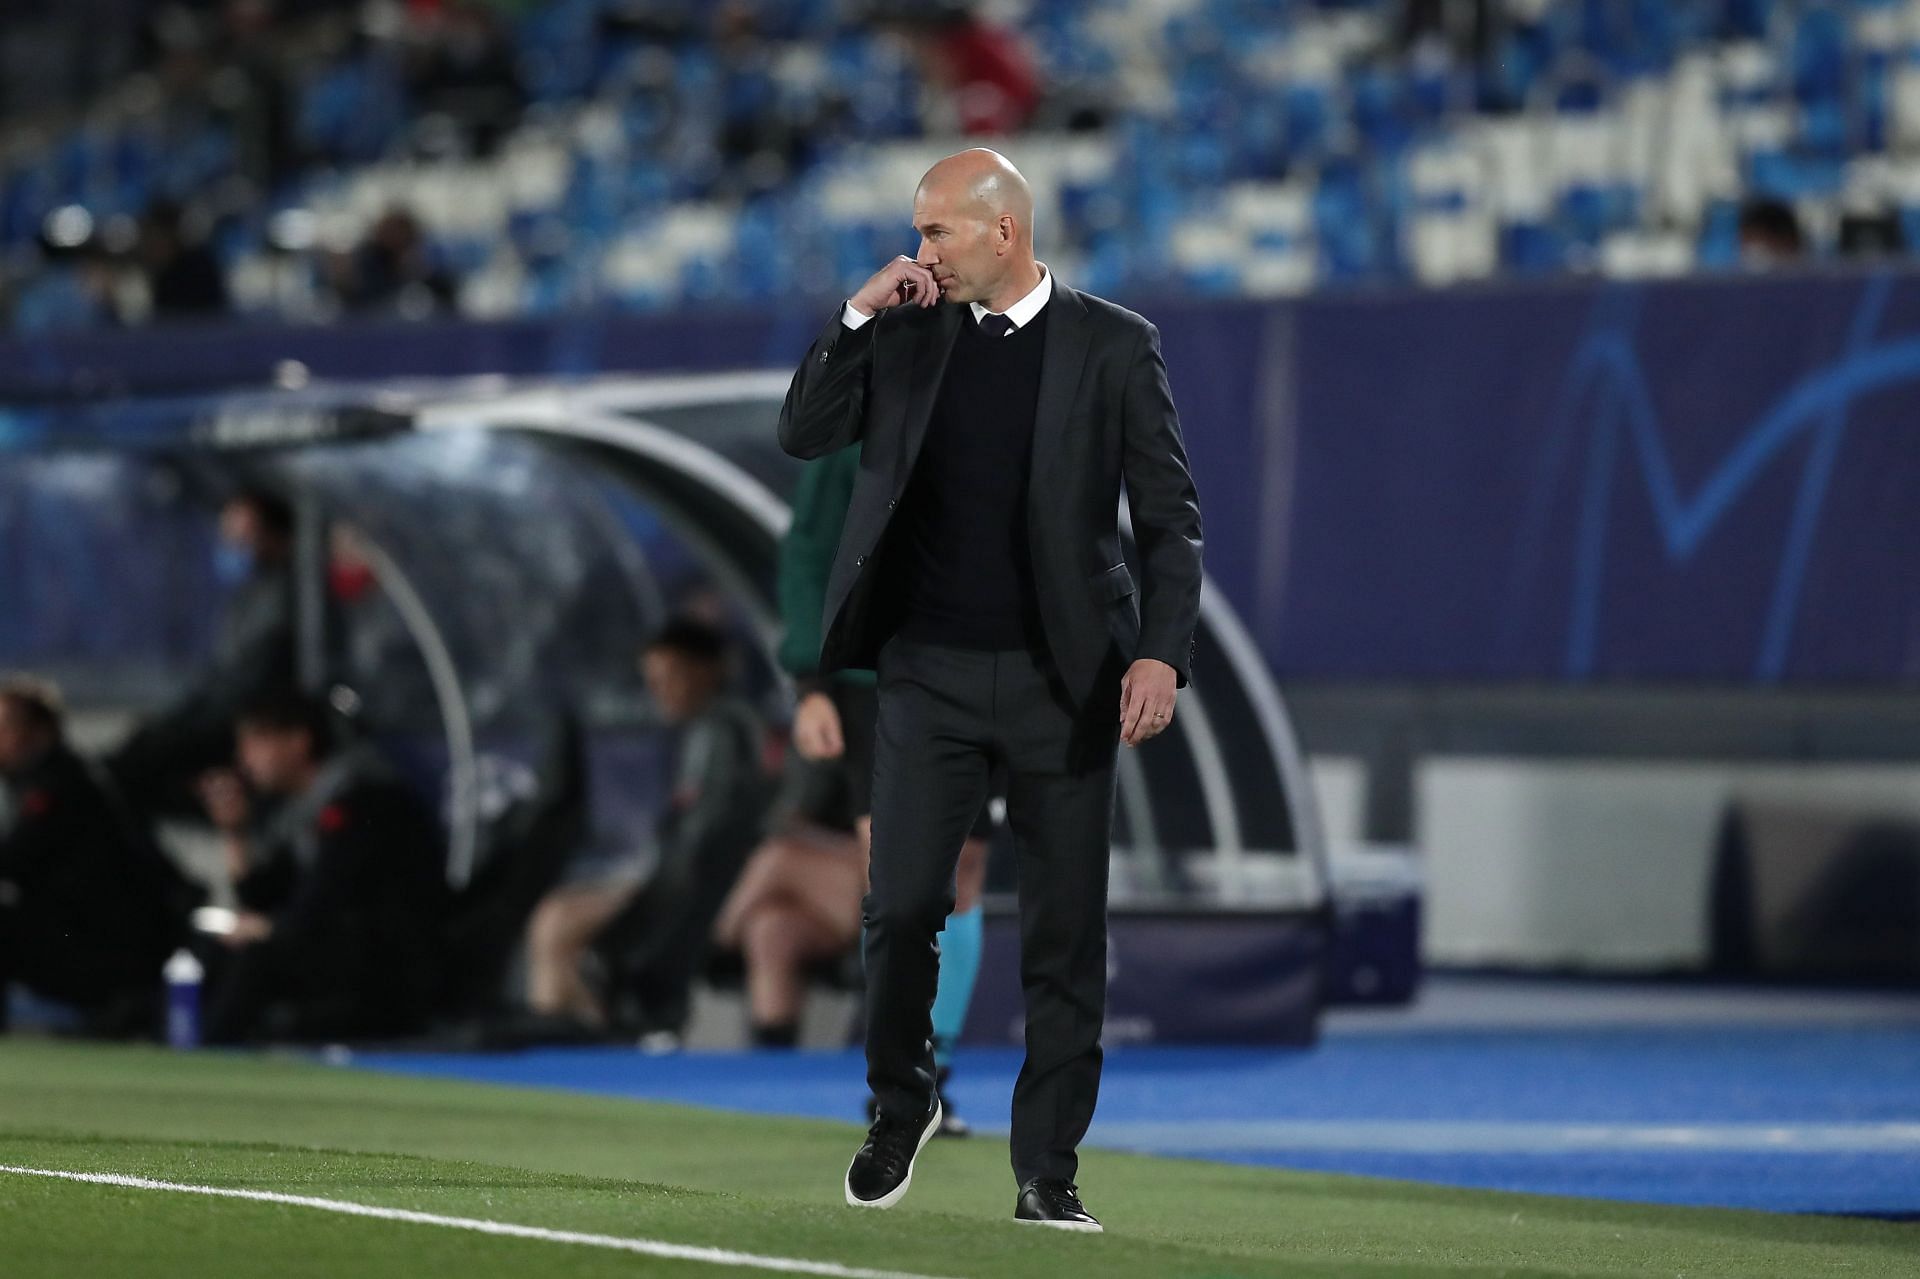 Zinedine Zidane has not been involved in a managerial role for over a year.